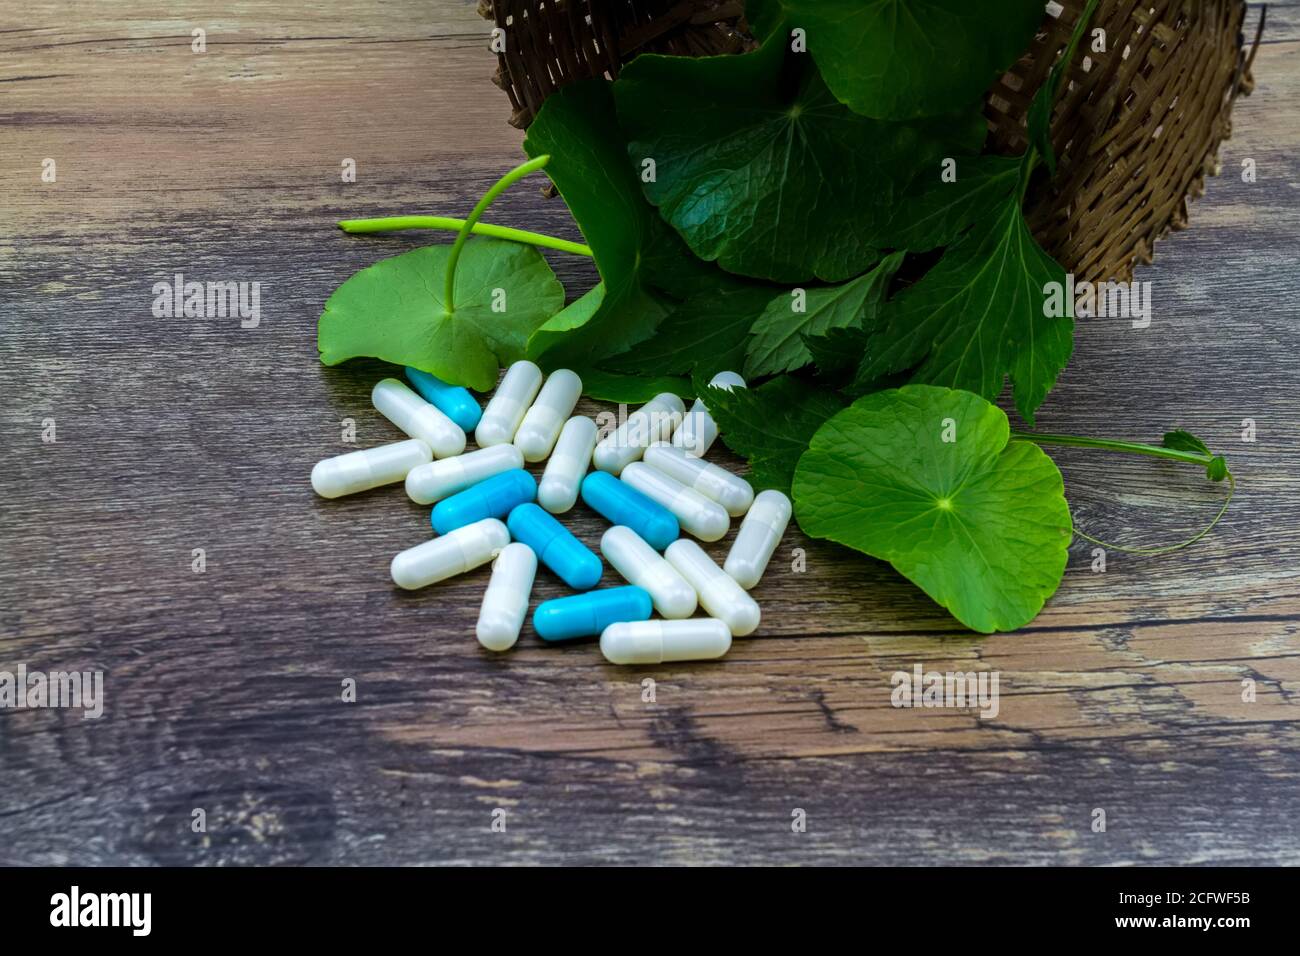 Colorful of pill and green leaf of White mugwort plant (Artemisia lactiflora) with Green Asiatic Pennywort (Centella asiatica ) in bamboo basket on gr Stock Photo